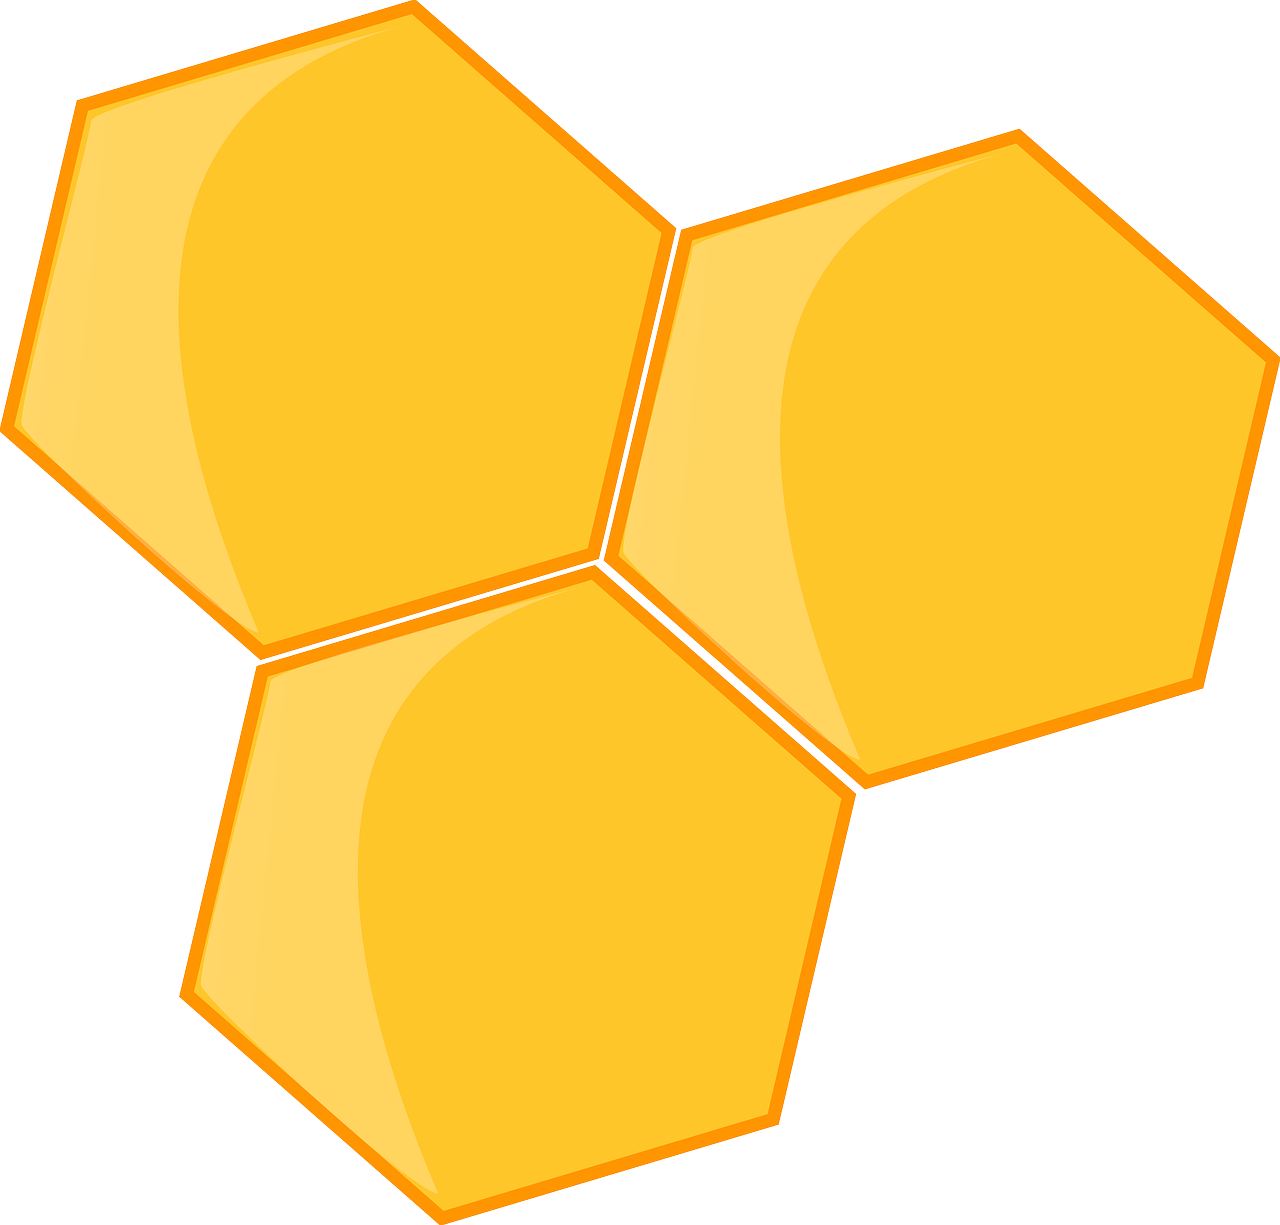 Honeycomb PNG-Datei